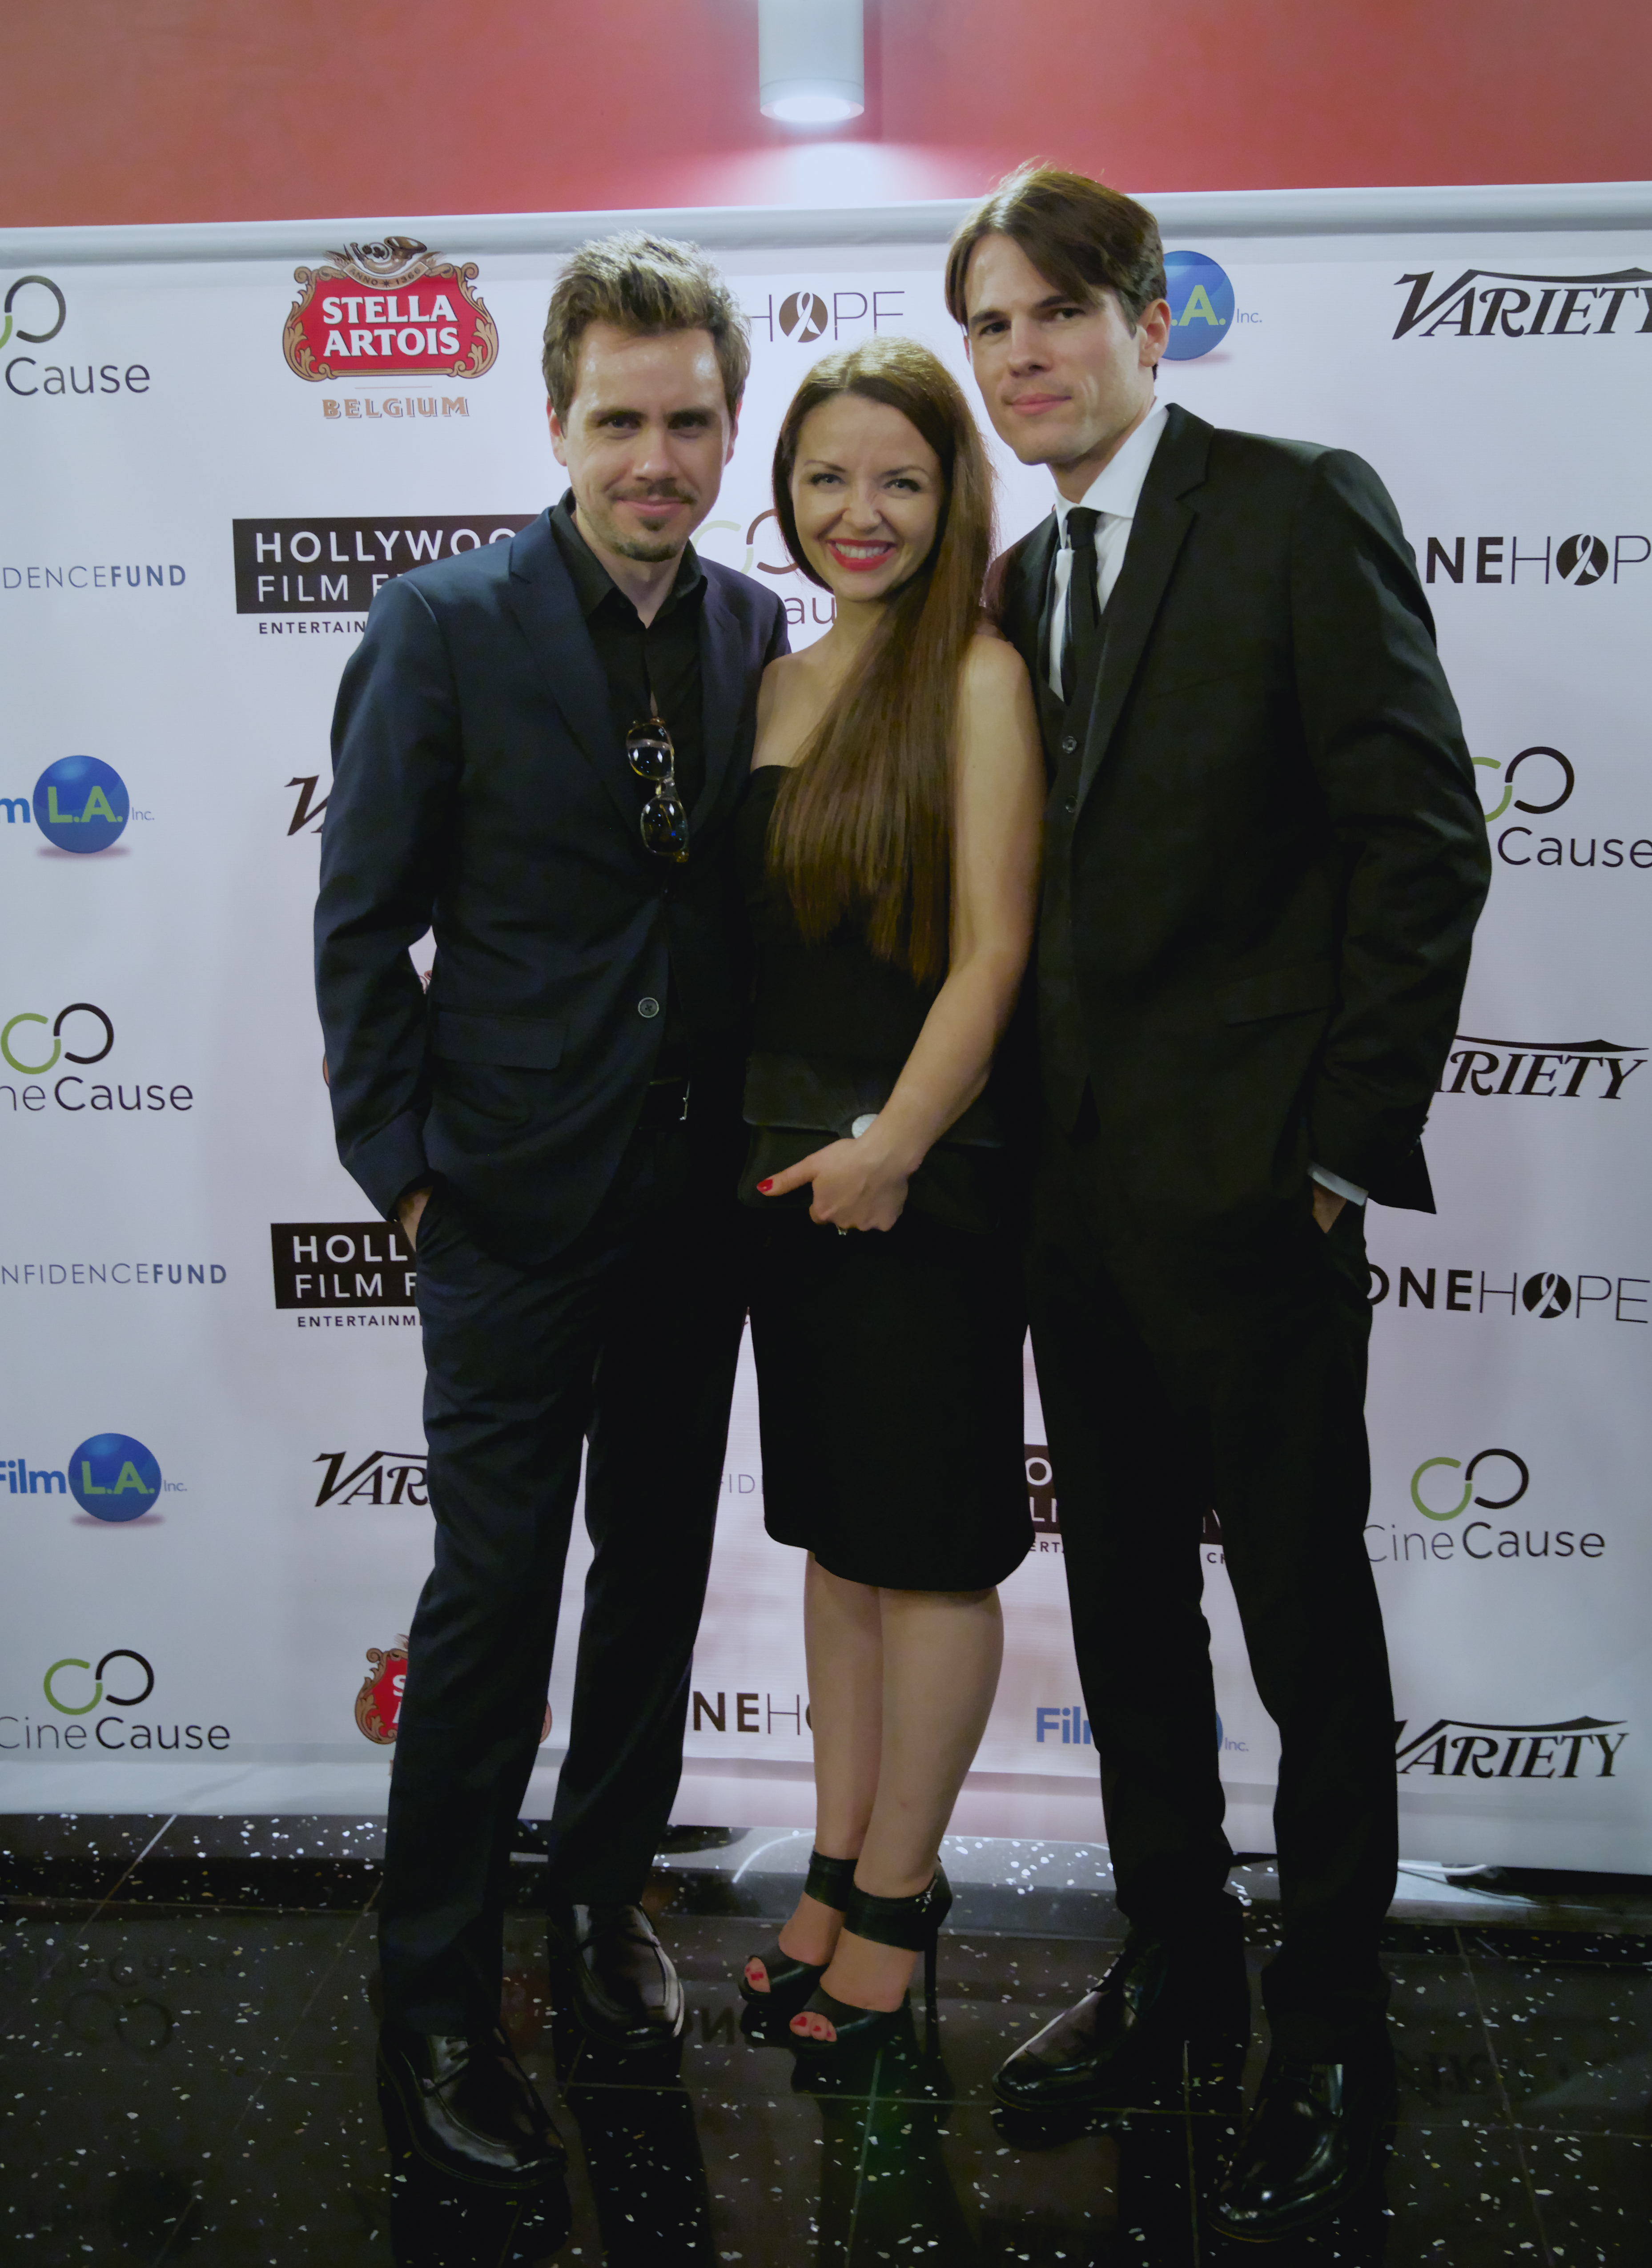 'The Toy Soldiers' at The Hollywood Film Festival - Arclight Theater - October 2014. With Monika Carlson and Chandler Rylko.